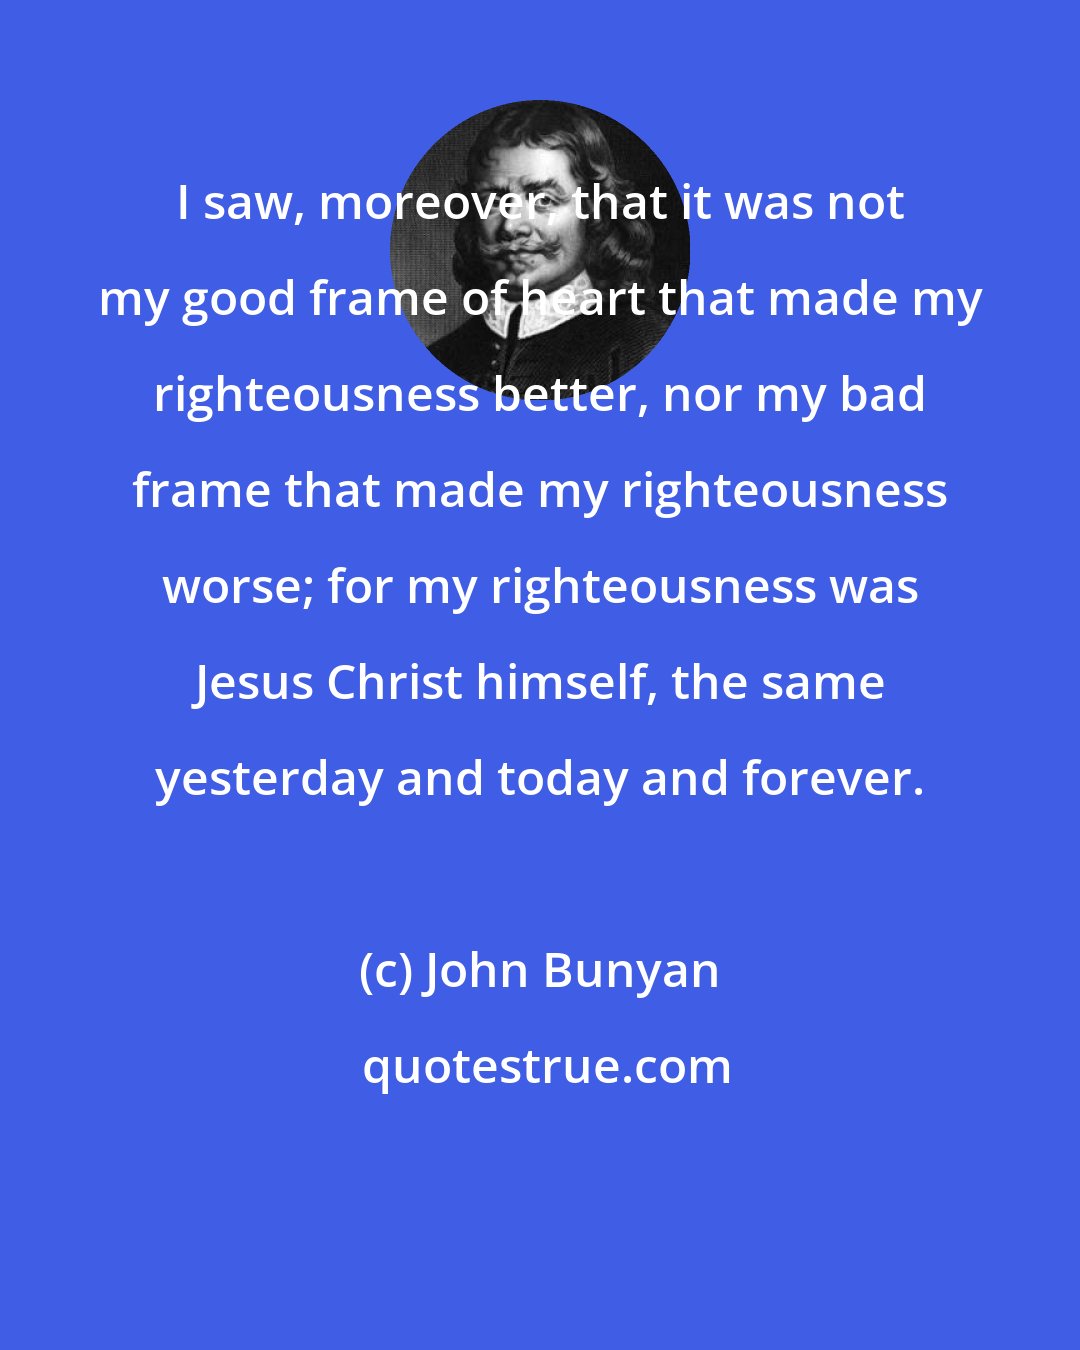 John Bunyan: I saw, moreover, that it was not my good frame of heart that made my righteousness better, nor my bad frame that made my righteousness worse; for my righteousness was Jesus Christ himself, the same yesterday and today and forever.